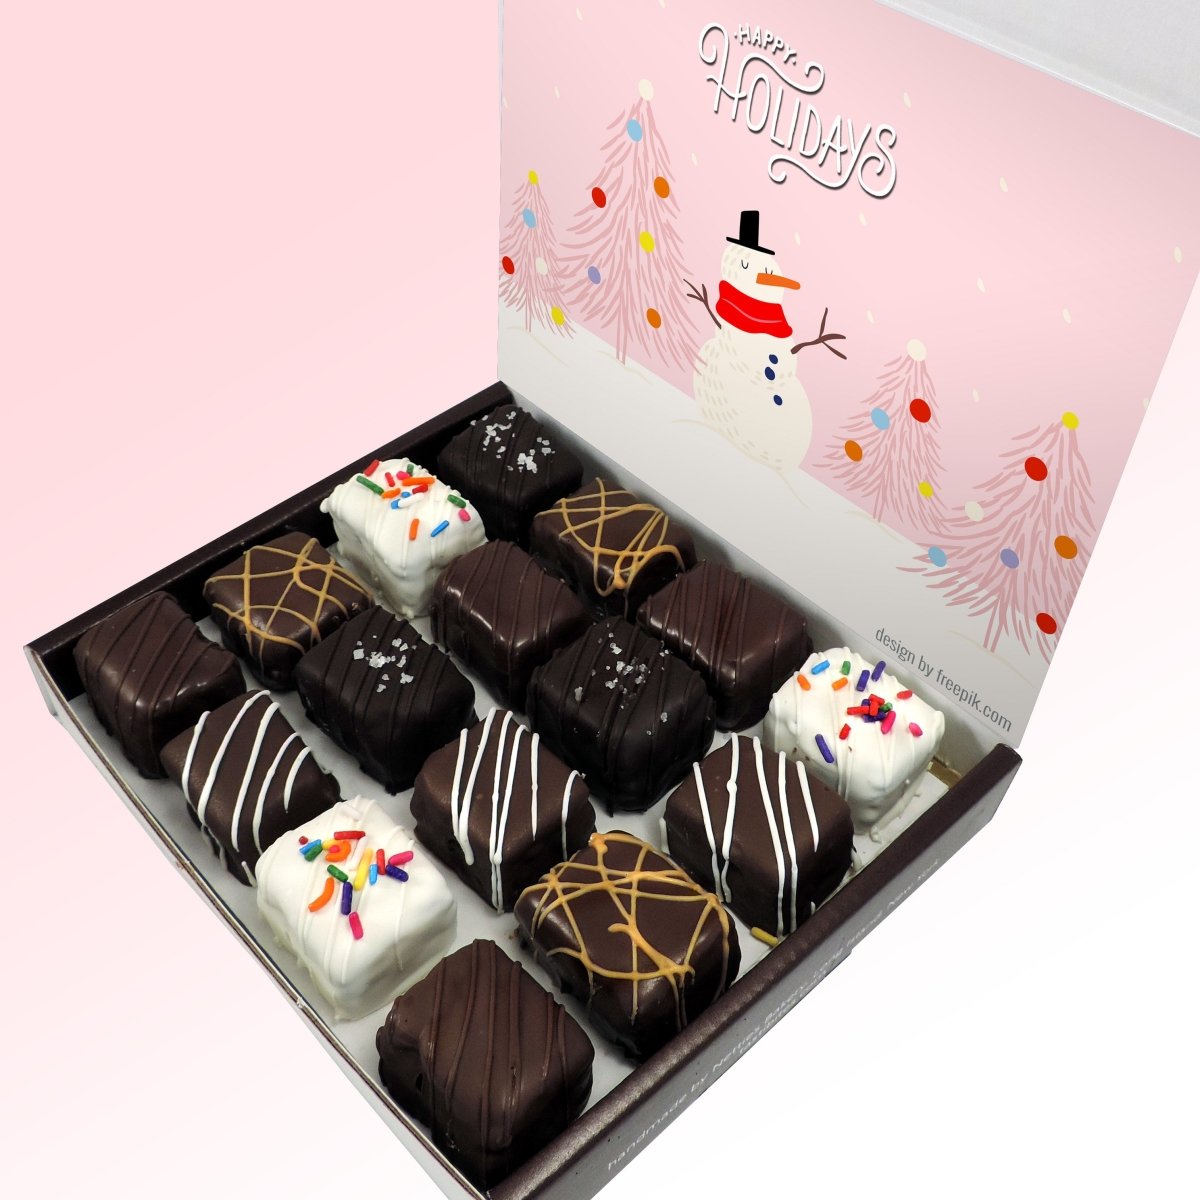 The Happy Holidays Box - Nettie's Craft Brownies